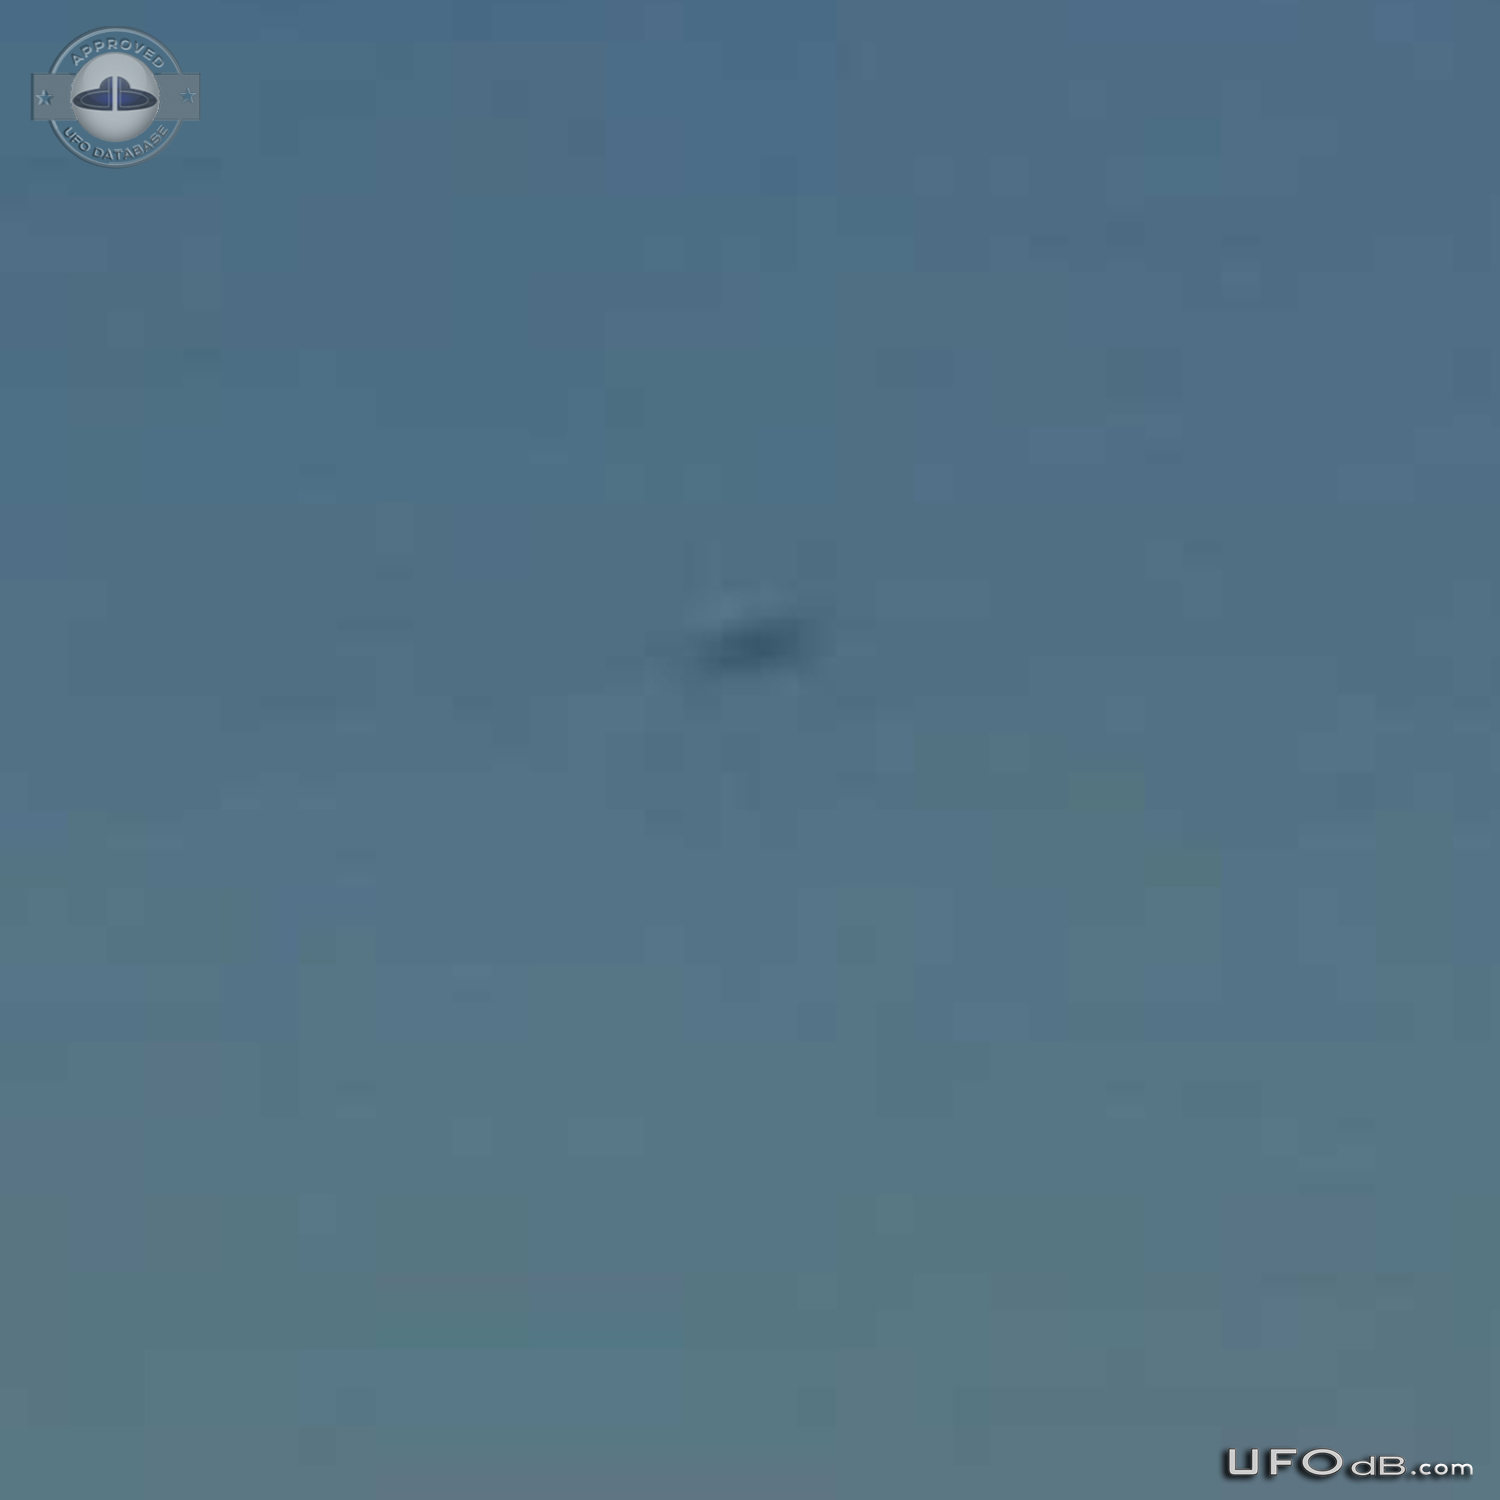 Toutist in Riva del Garda, Italy get a picture of a UFO - October 2011 UFO Picture #382-3